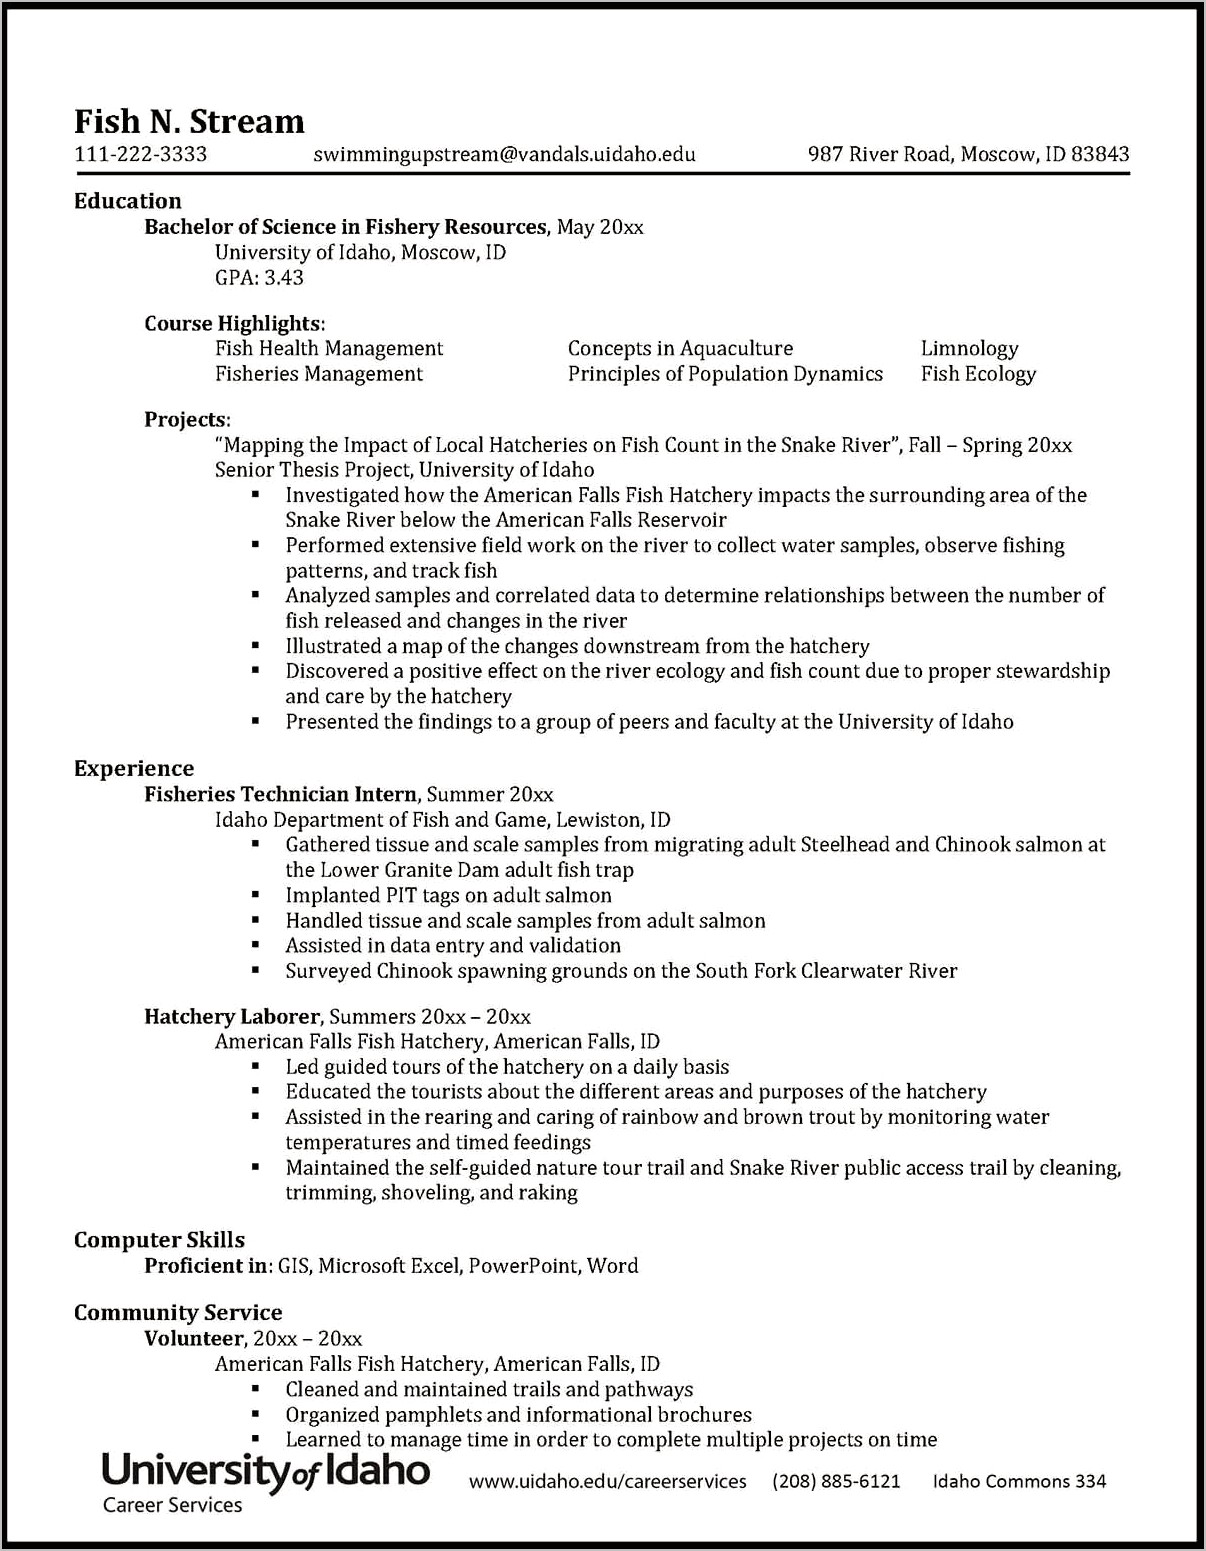 Identity Access Management Resume Format